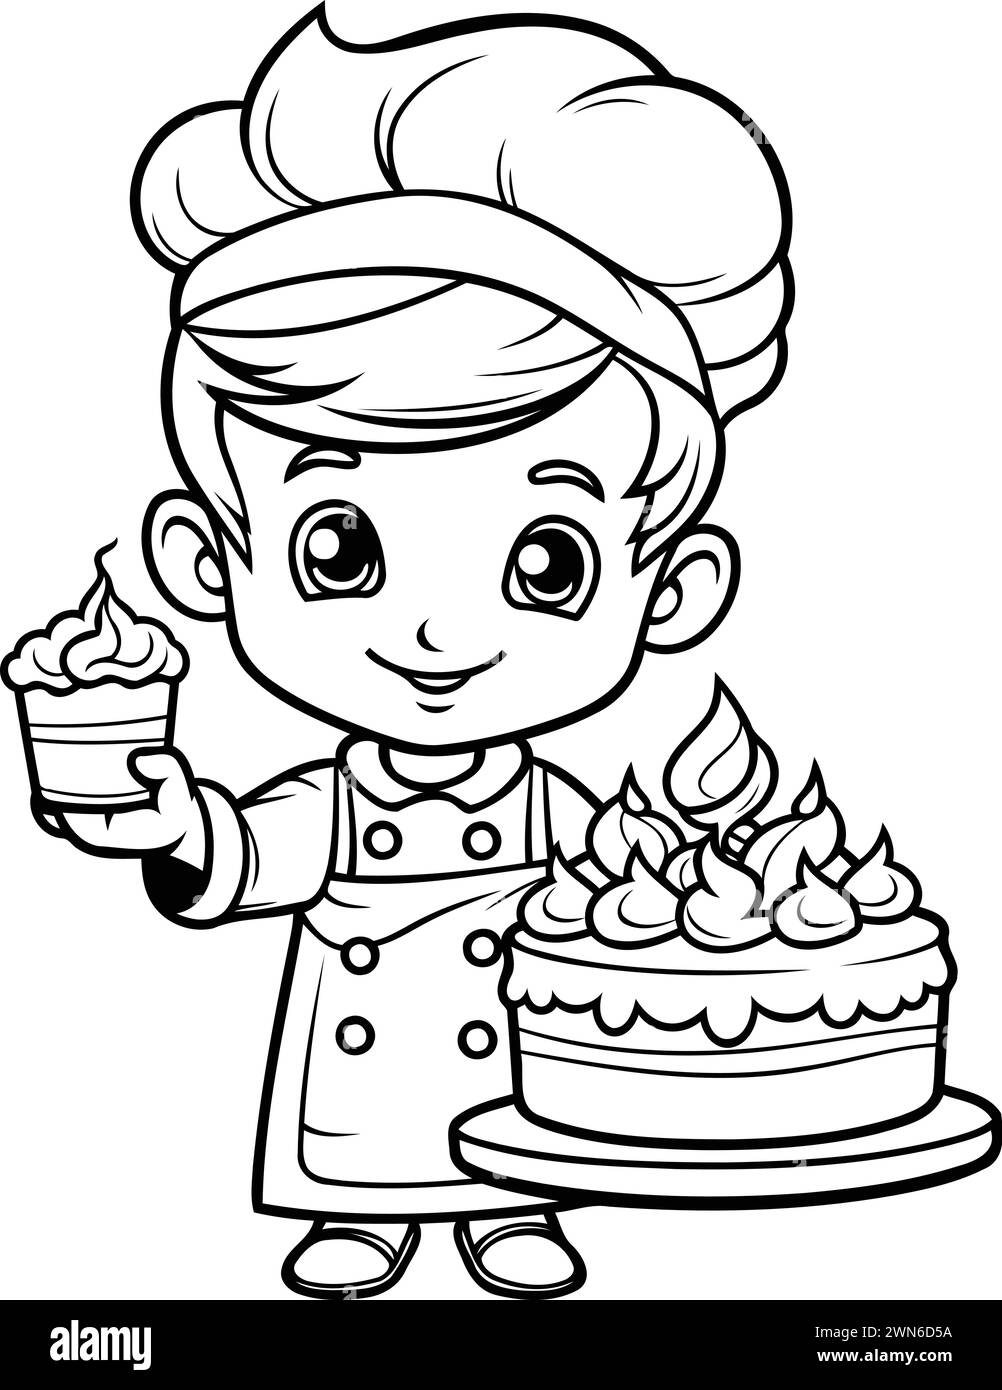 Black and White Cartoon Illustration of Cute Little Boy Chef Character with Cake for Coloring Book Stock Vector